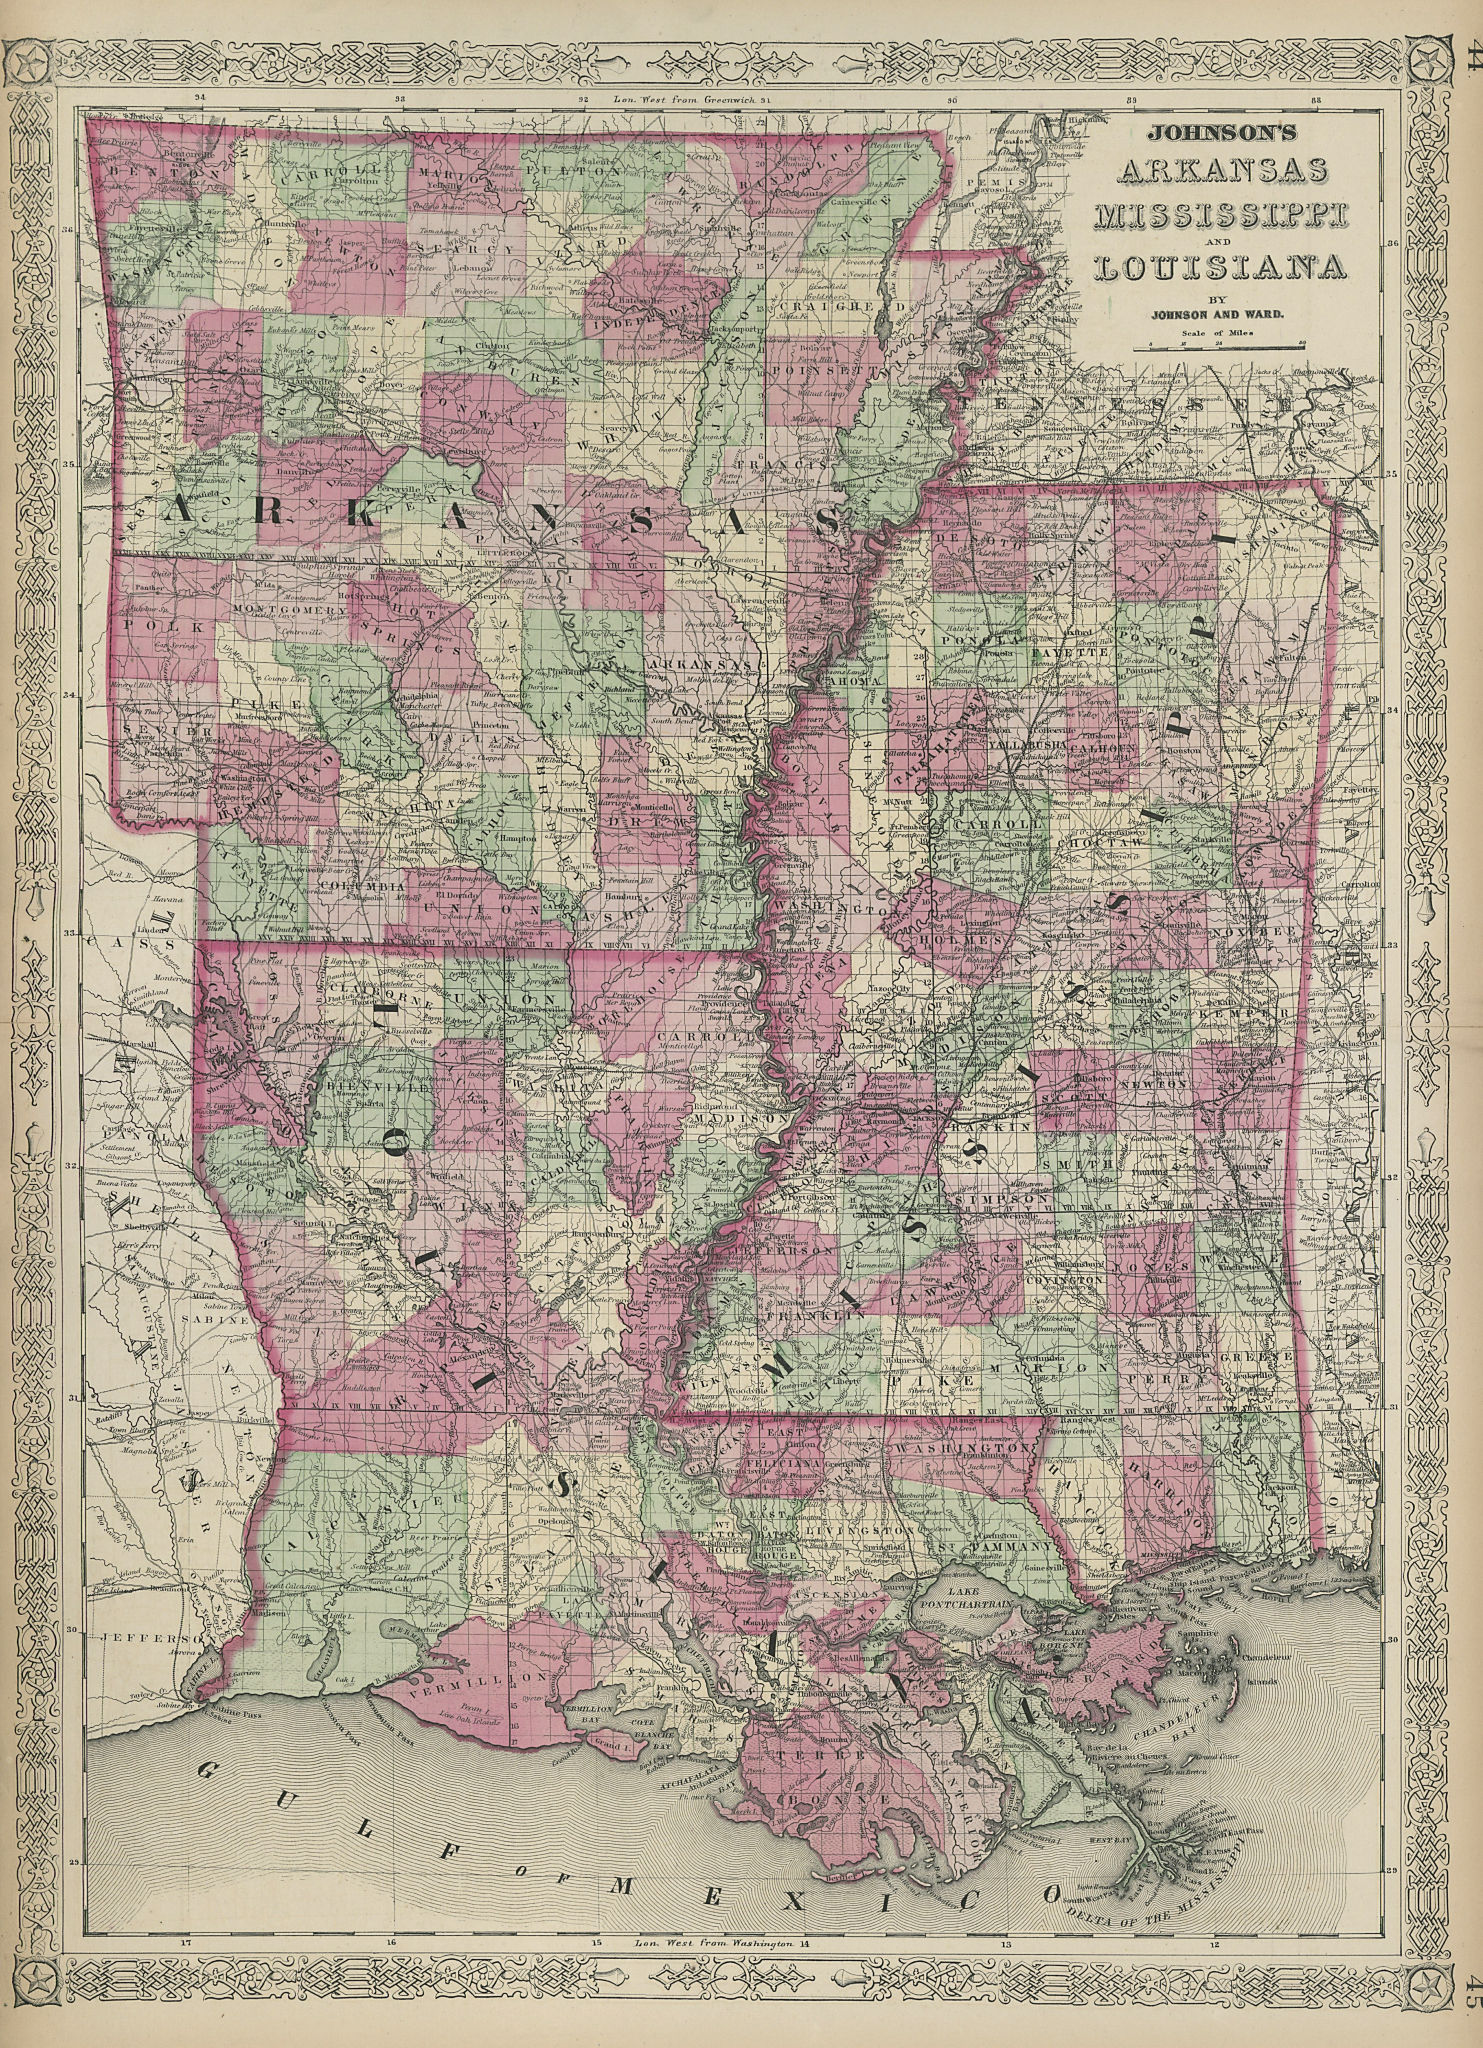 Associate Product Johnson's Arkansas, Mississippi & Louisiana showing counties/parishes 1865 map